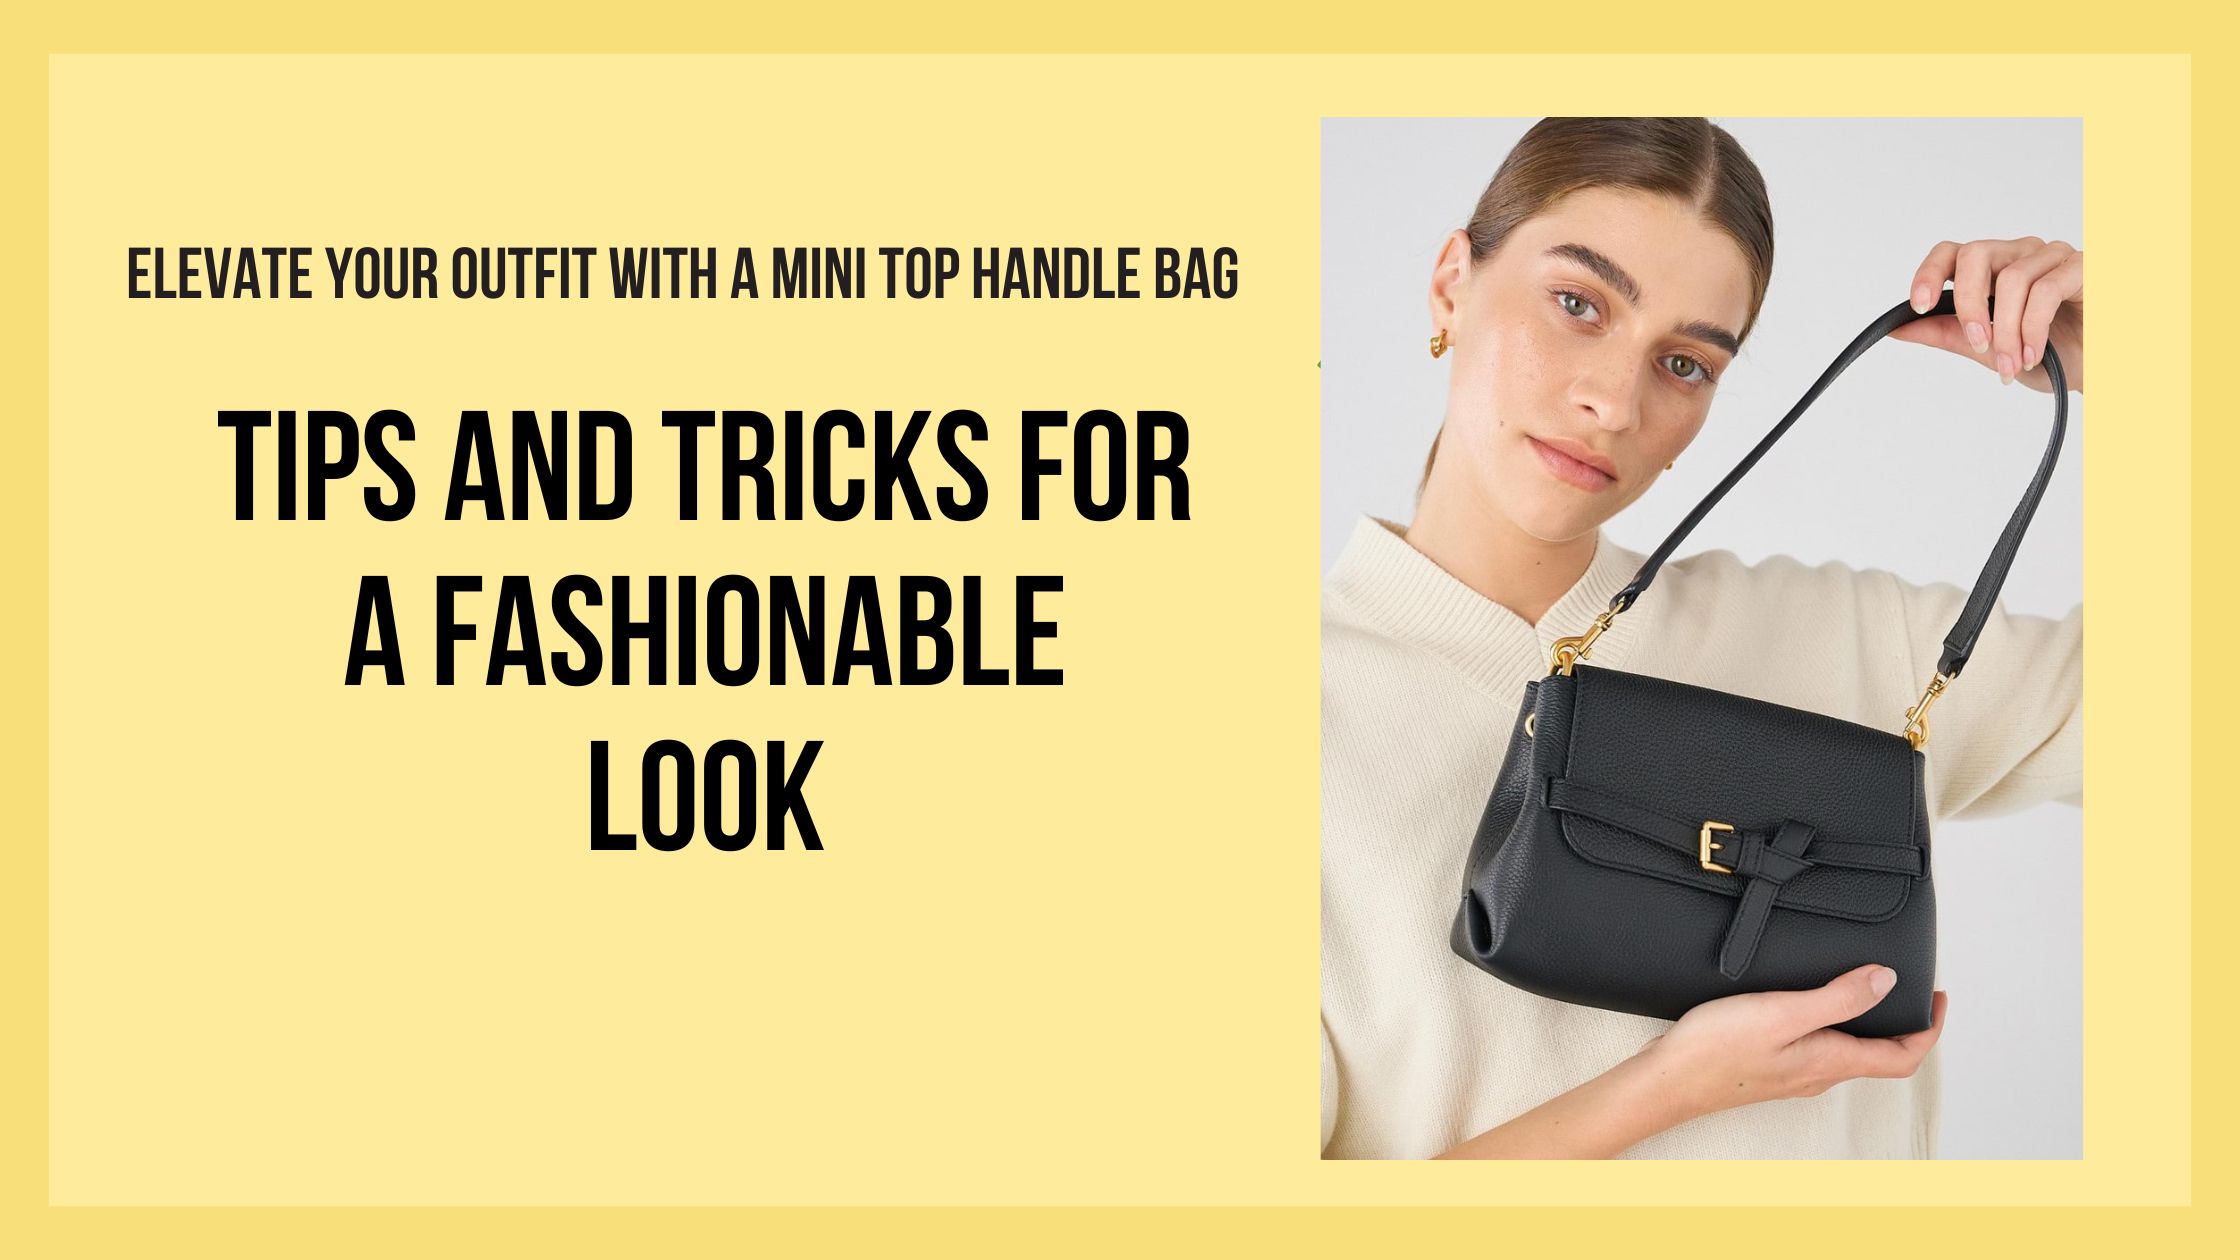 Elevate Your Outfit with a Mini Top Handle Bag